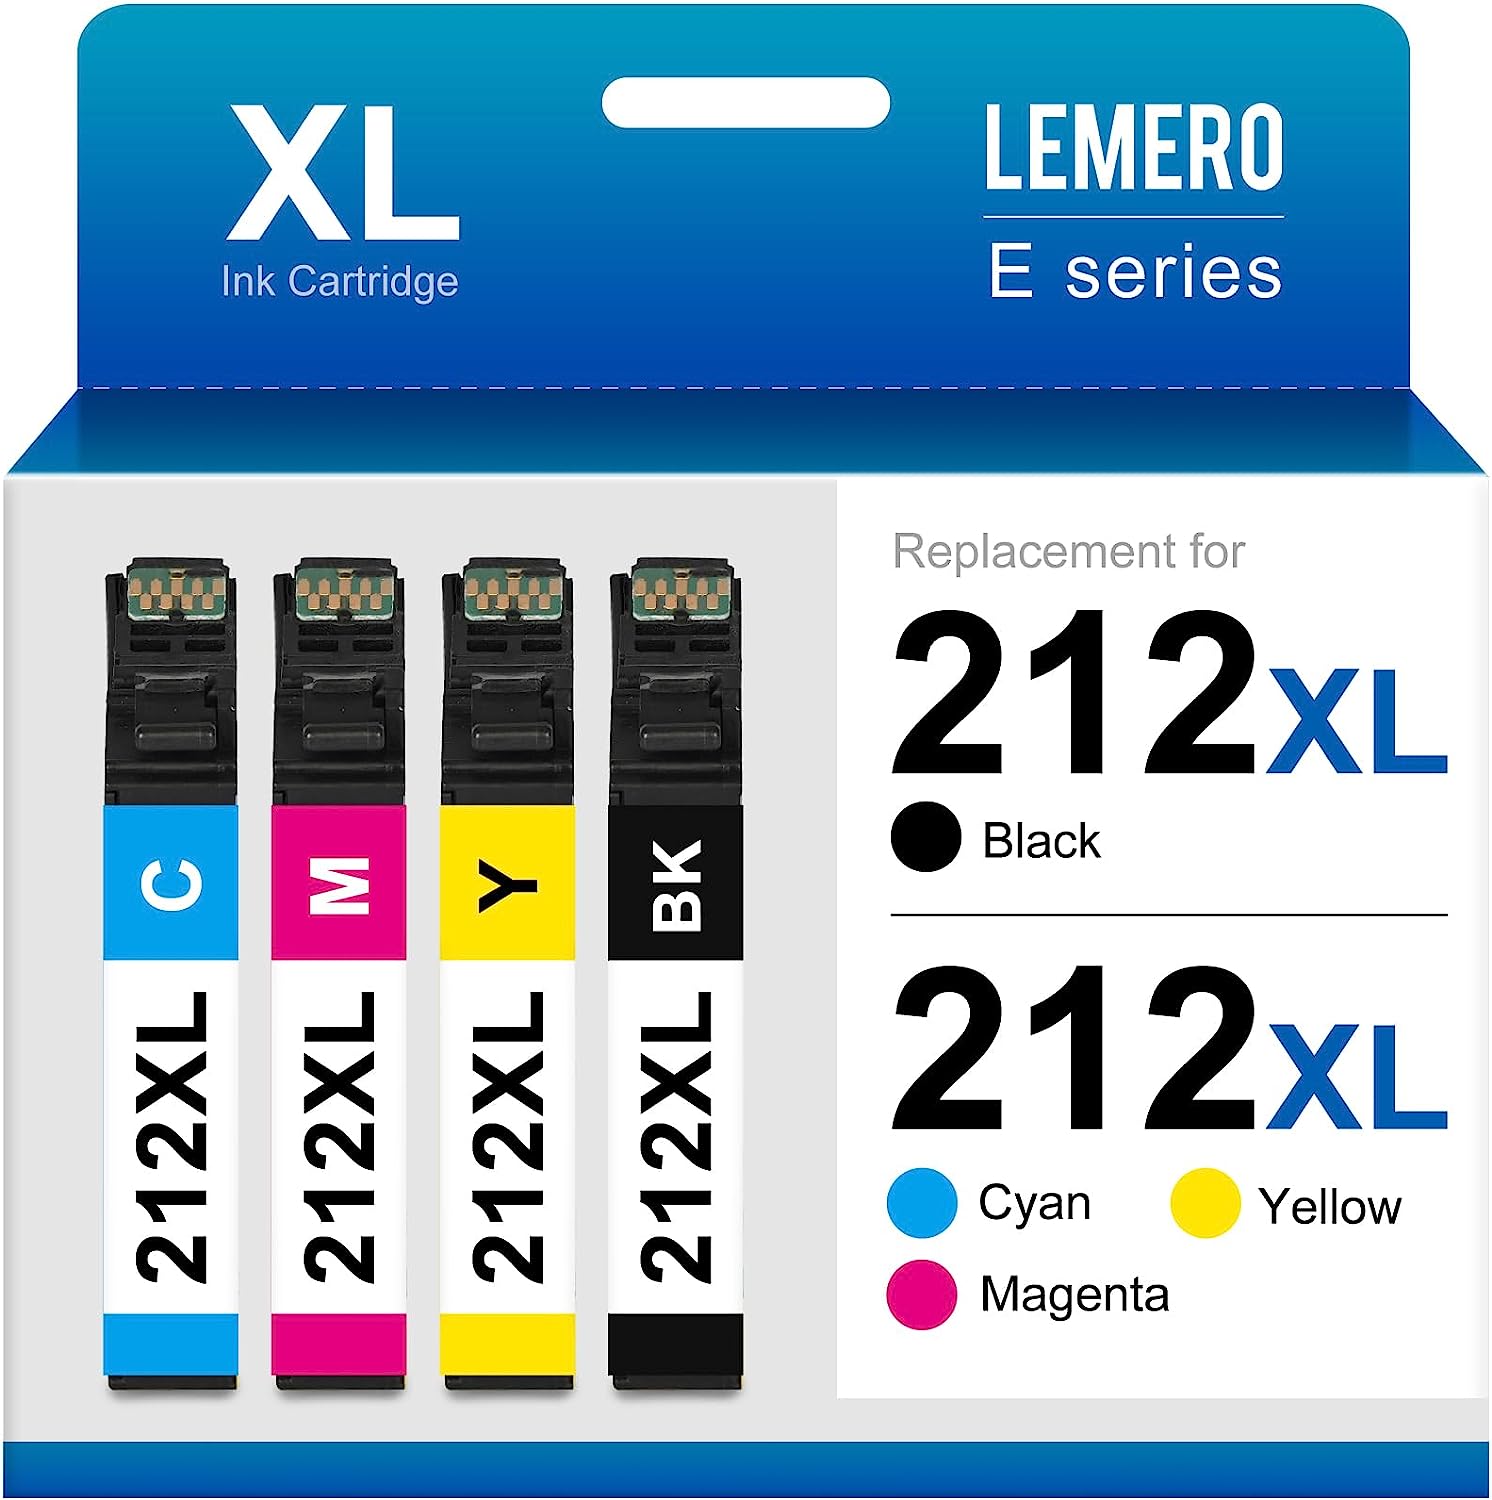 LEMERO 212XL ink cartridges: "High-capacity LEMERO 212XL ink cartridges featuring black, cyan, magenta, and yellow for efficient and vibrant printing.